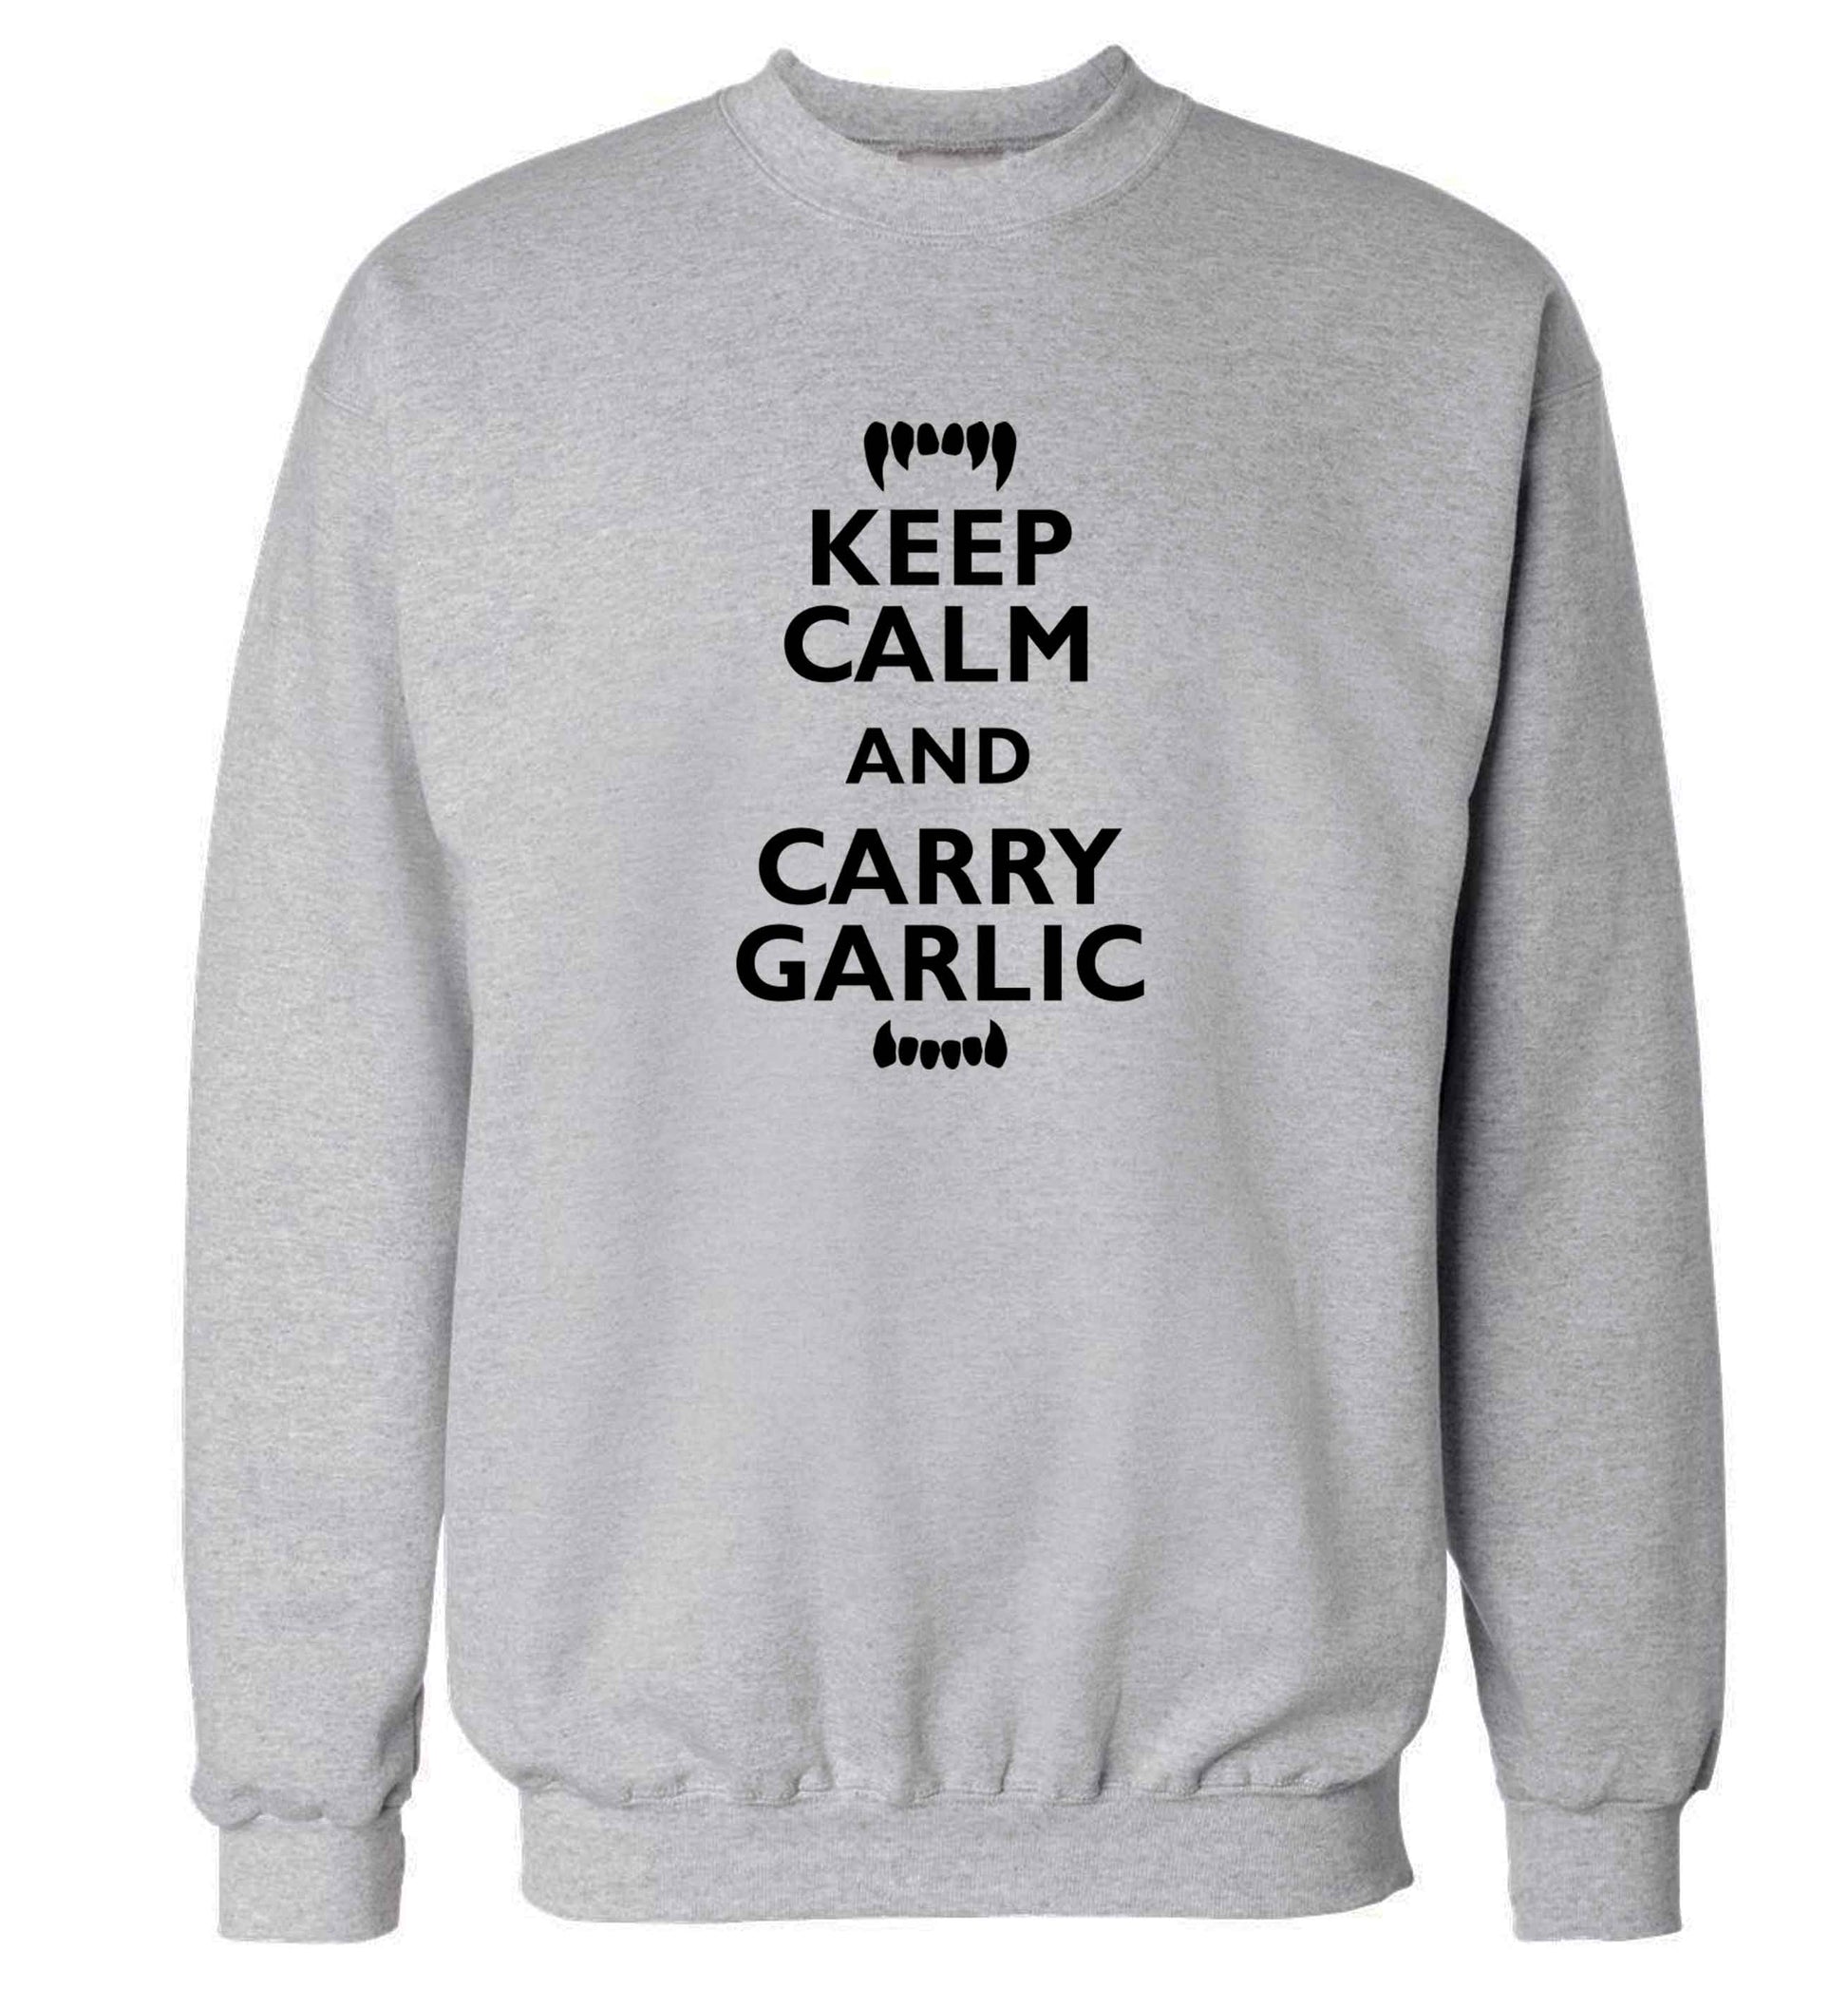 Keep calm and carry garlic adult's unisex grey sweater 2XL